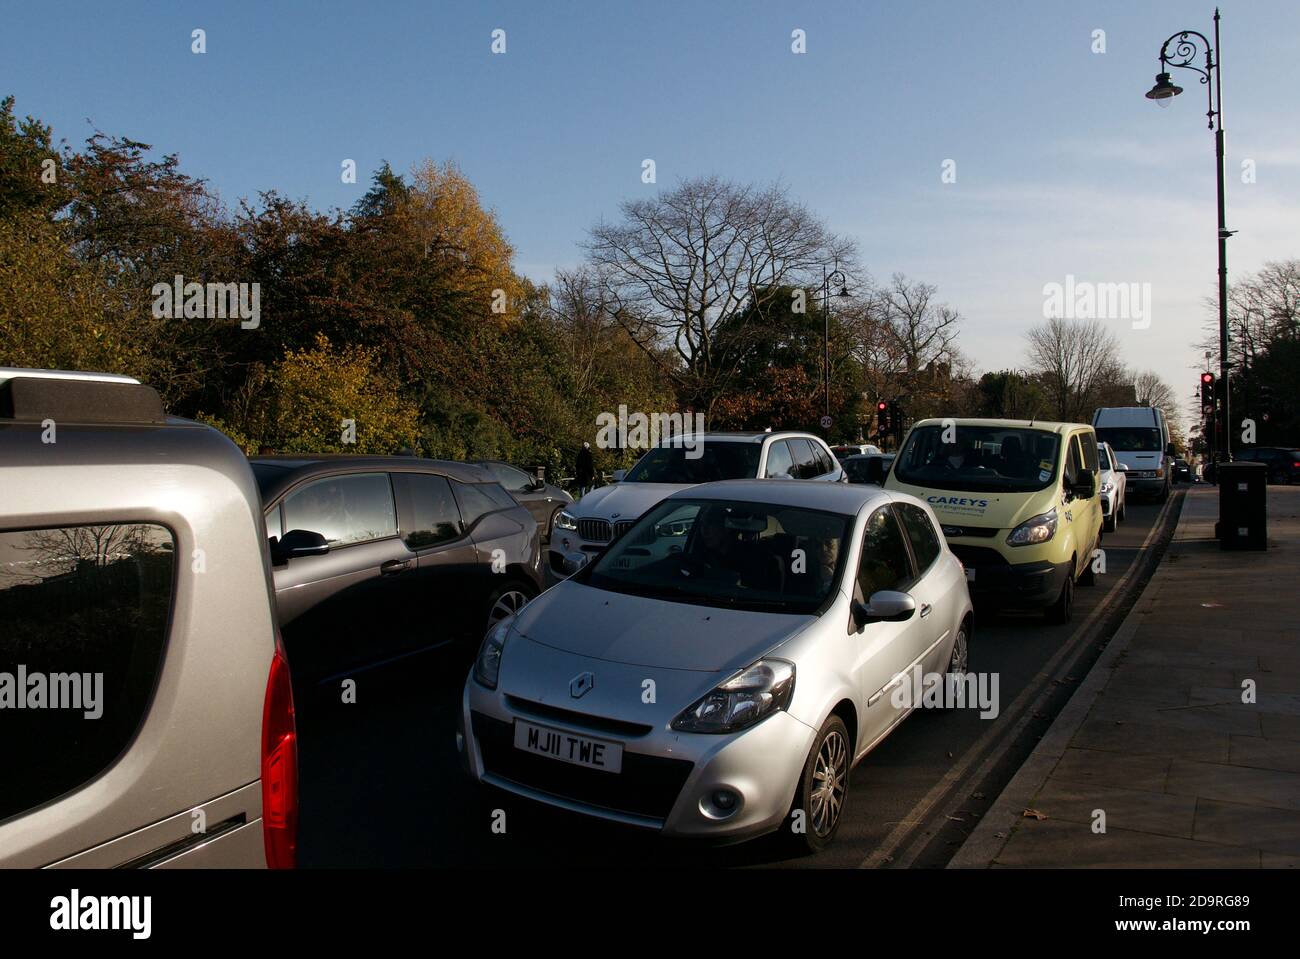 Standstill car traffic in Hampstead despite 'Stay at home' instruction during covid19 pandemic. Stock Photo